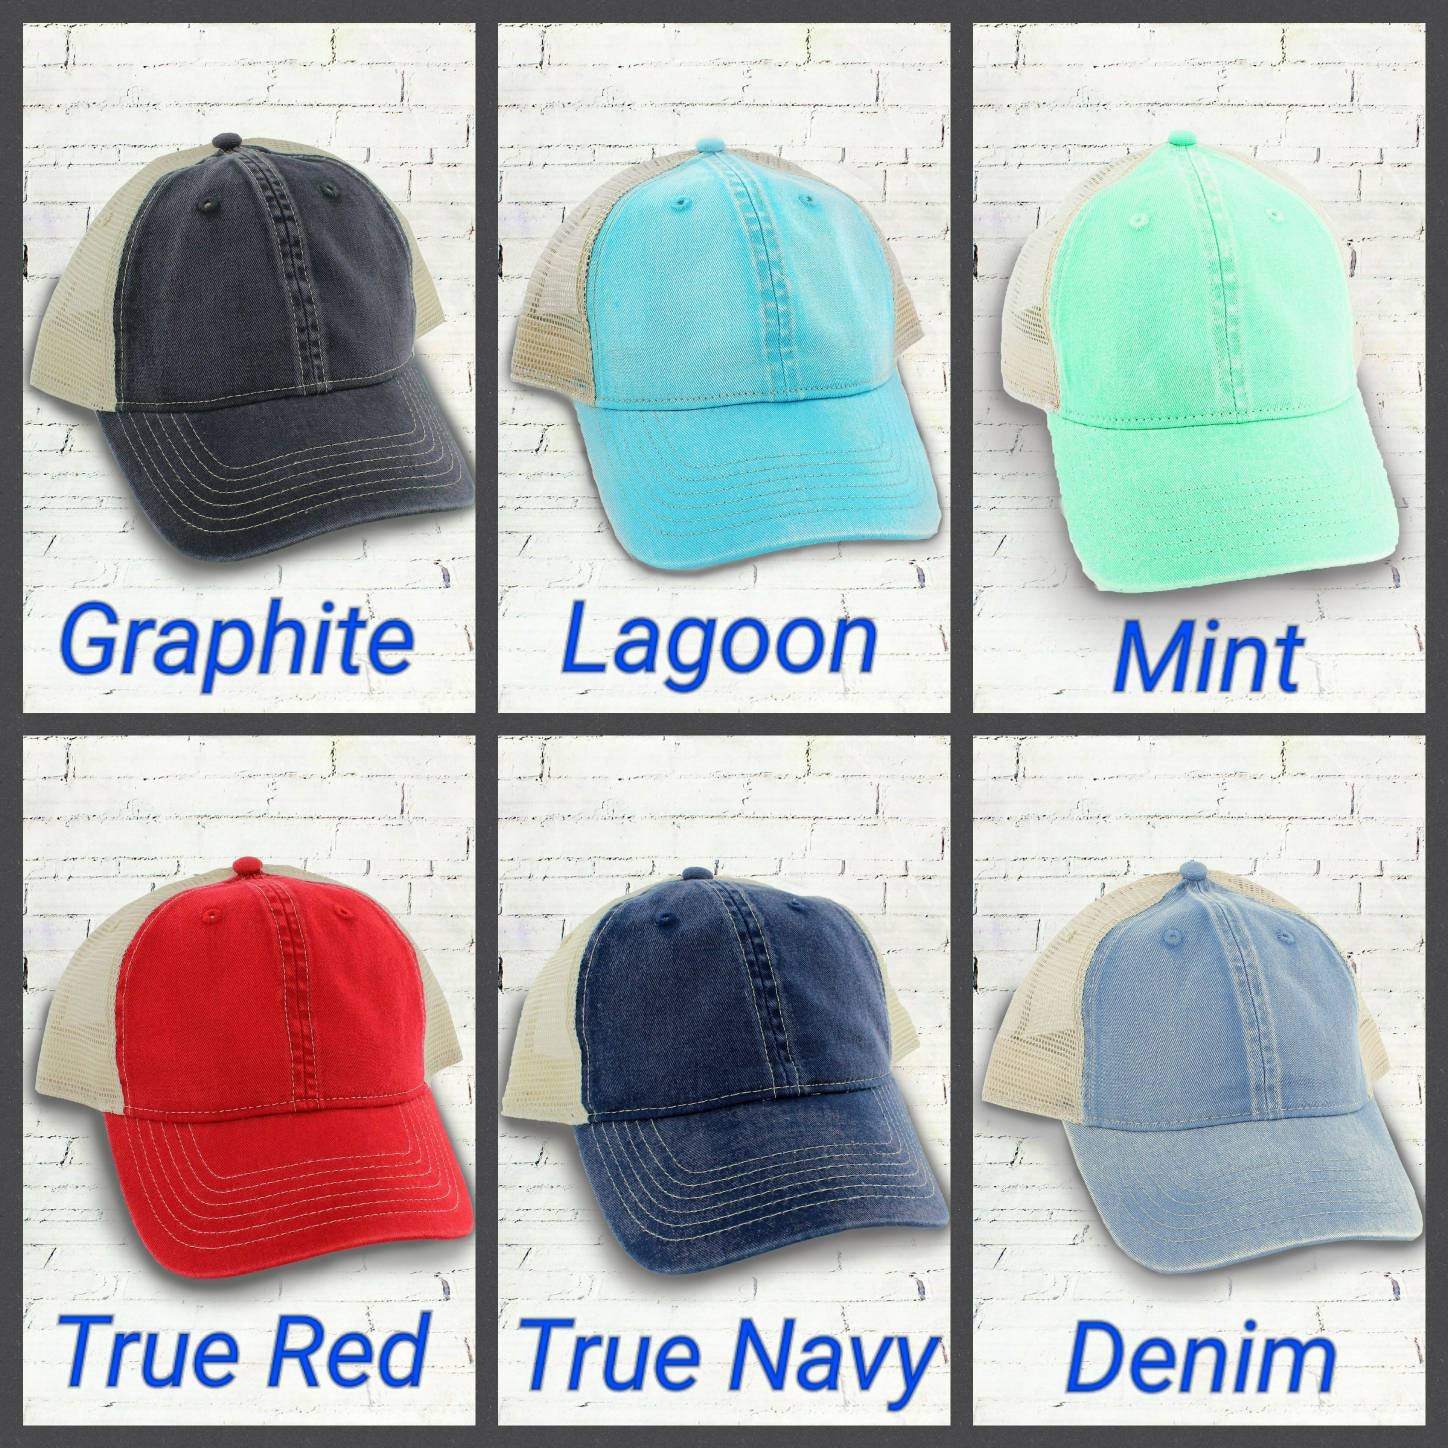 Any City Area Code Hat, Embroidered Area Codes, Zip Code, Airport Code Hat, Embroidery Personalized, Monogrammed, Hats, City Codes, STL